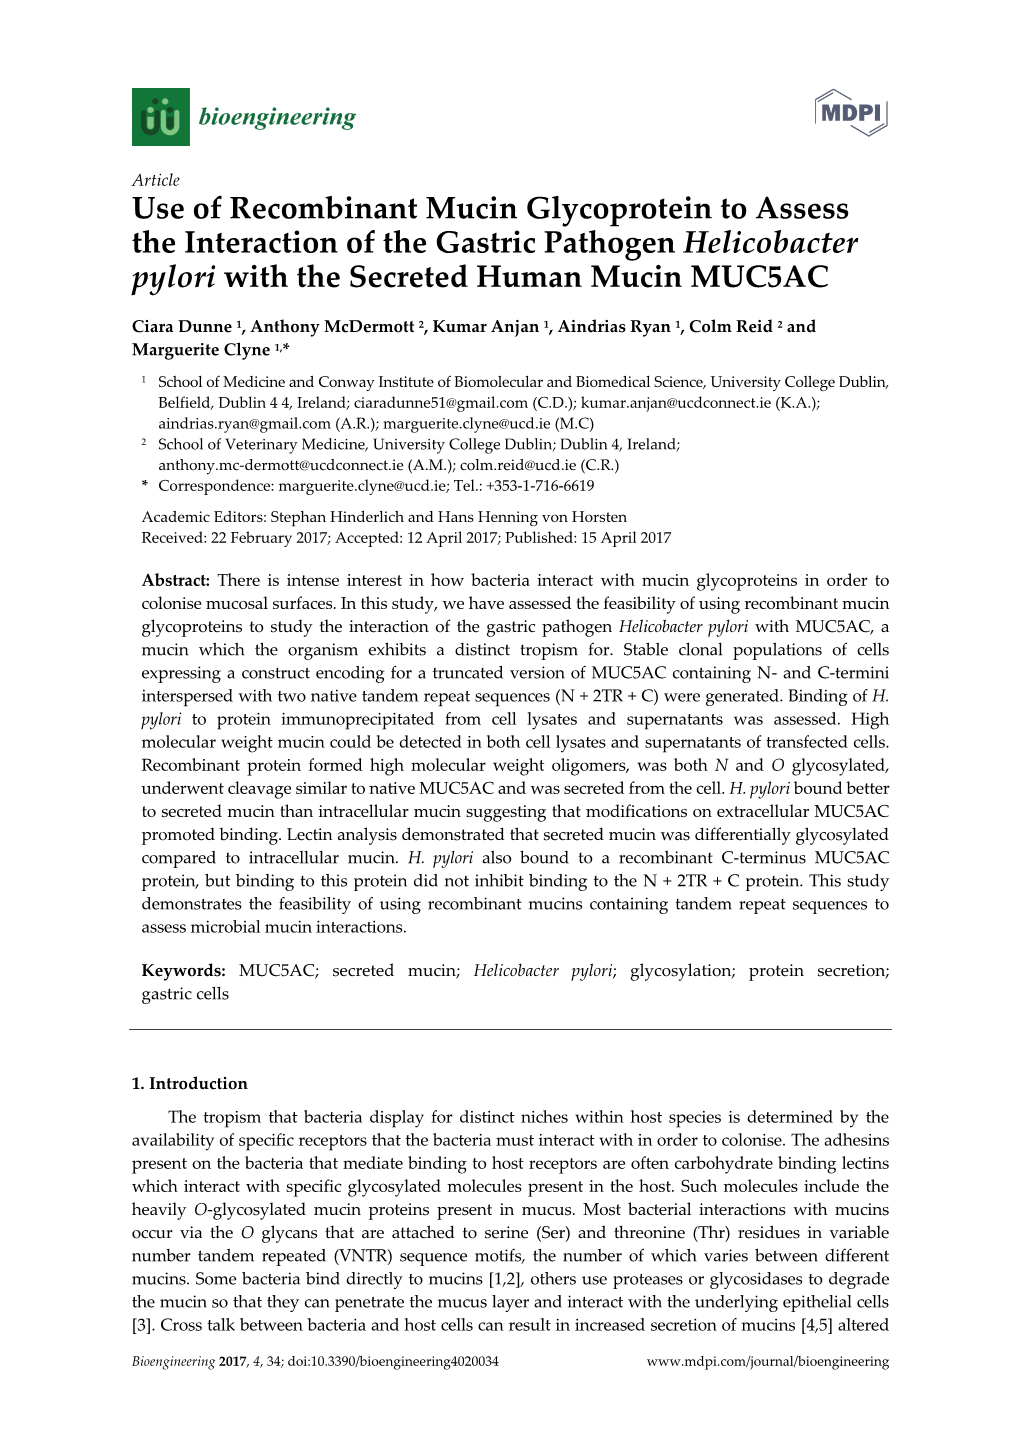 Use of Recombinant Mucin Glycoprotein to Assess the Interaction of the Gastric Pathogen Helicobacter Pylori with the Secreted Human Mucin MUC5AC